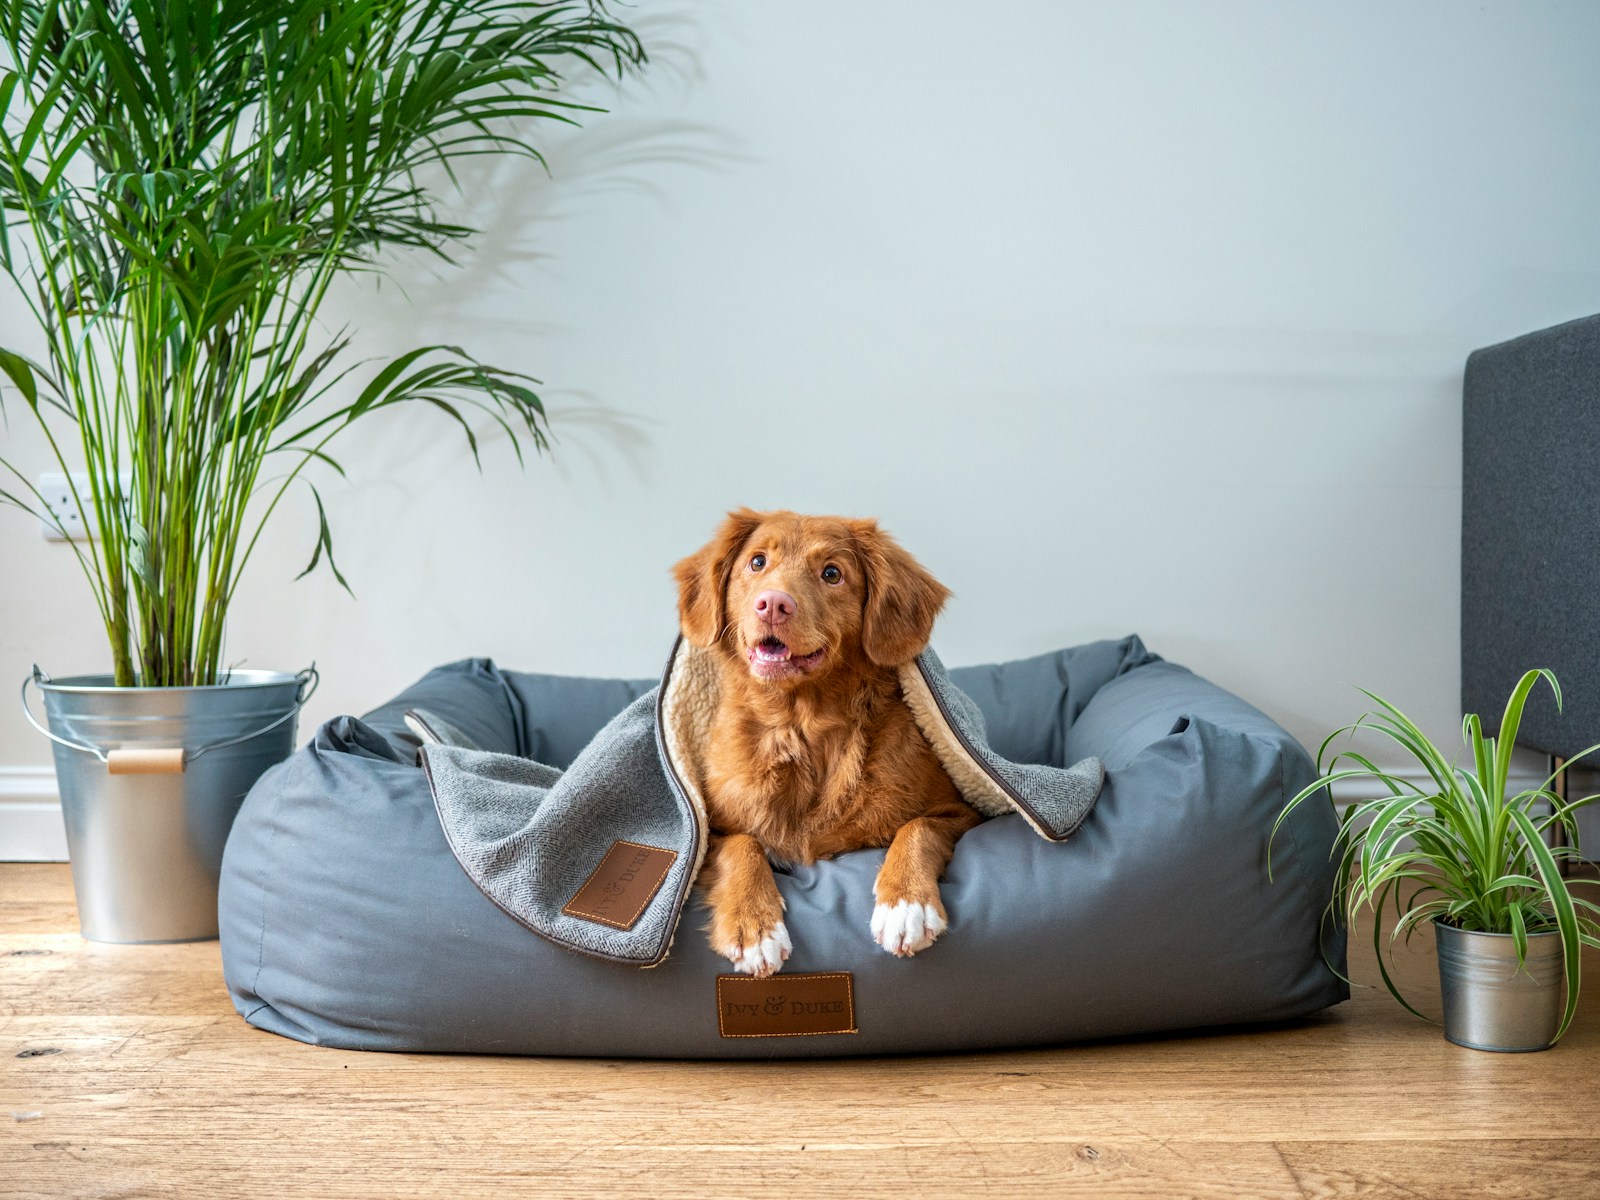 DIY Guide: How to Build a Murphy Bed for Your Dog